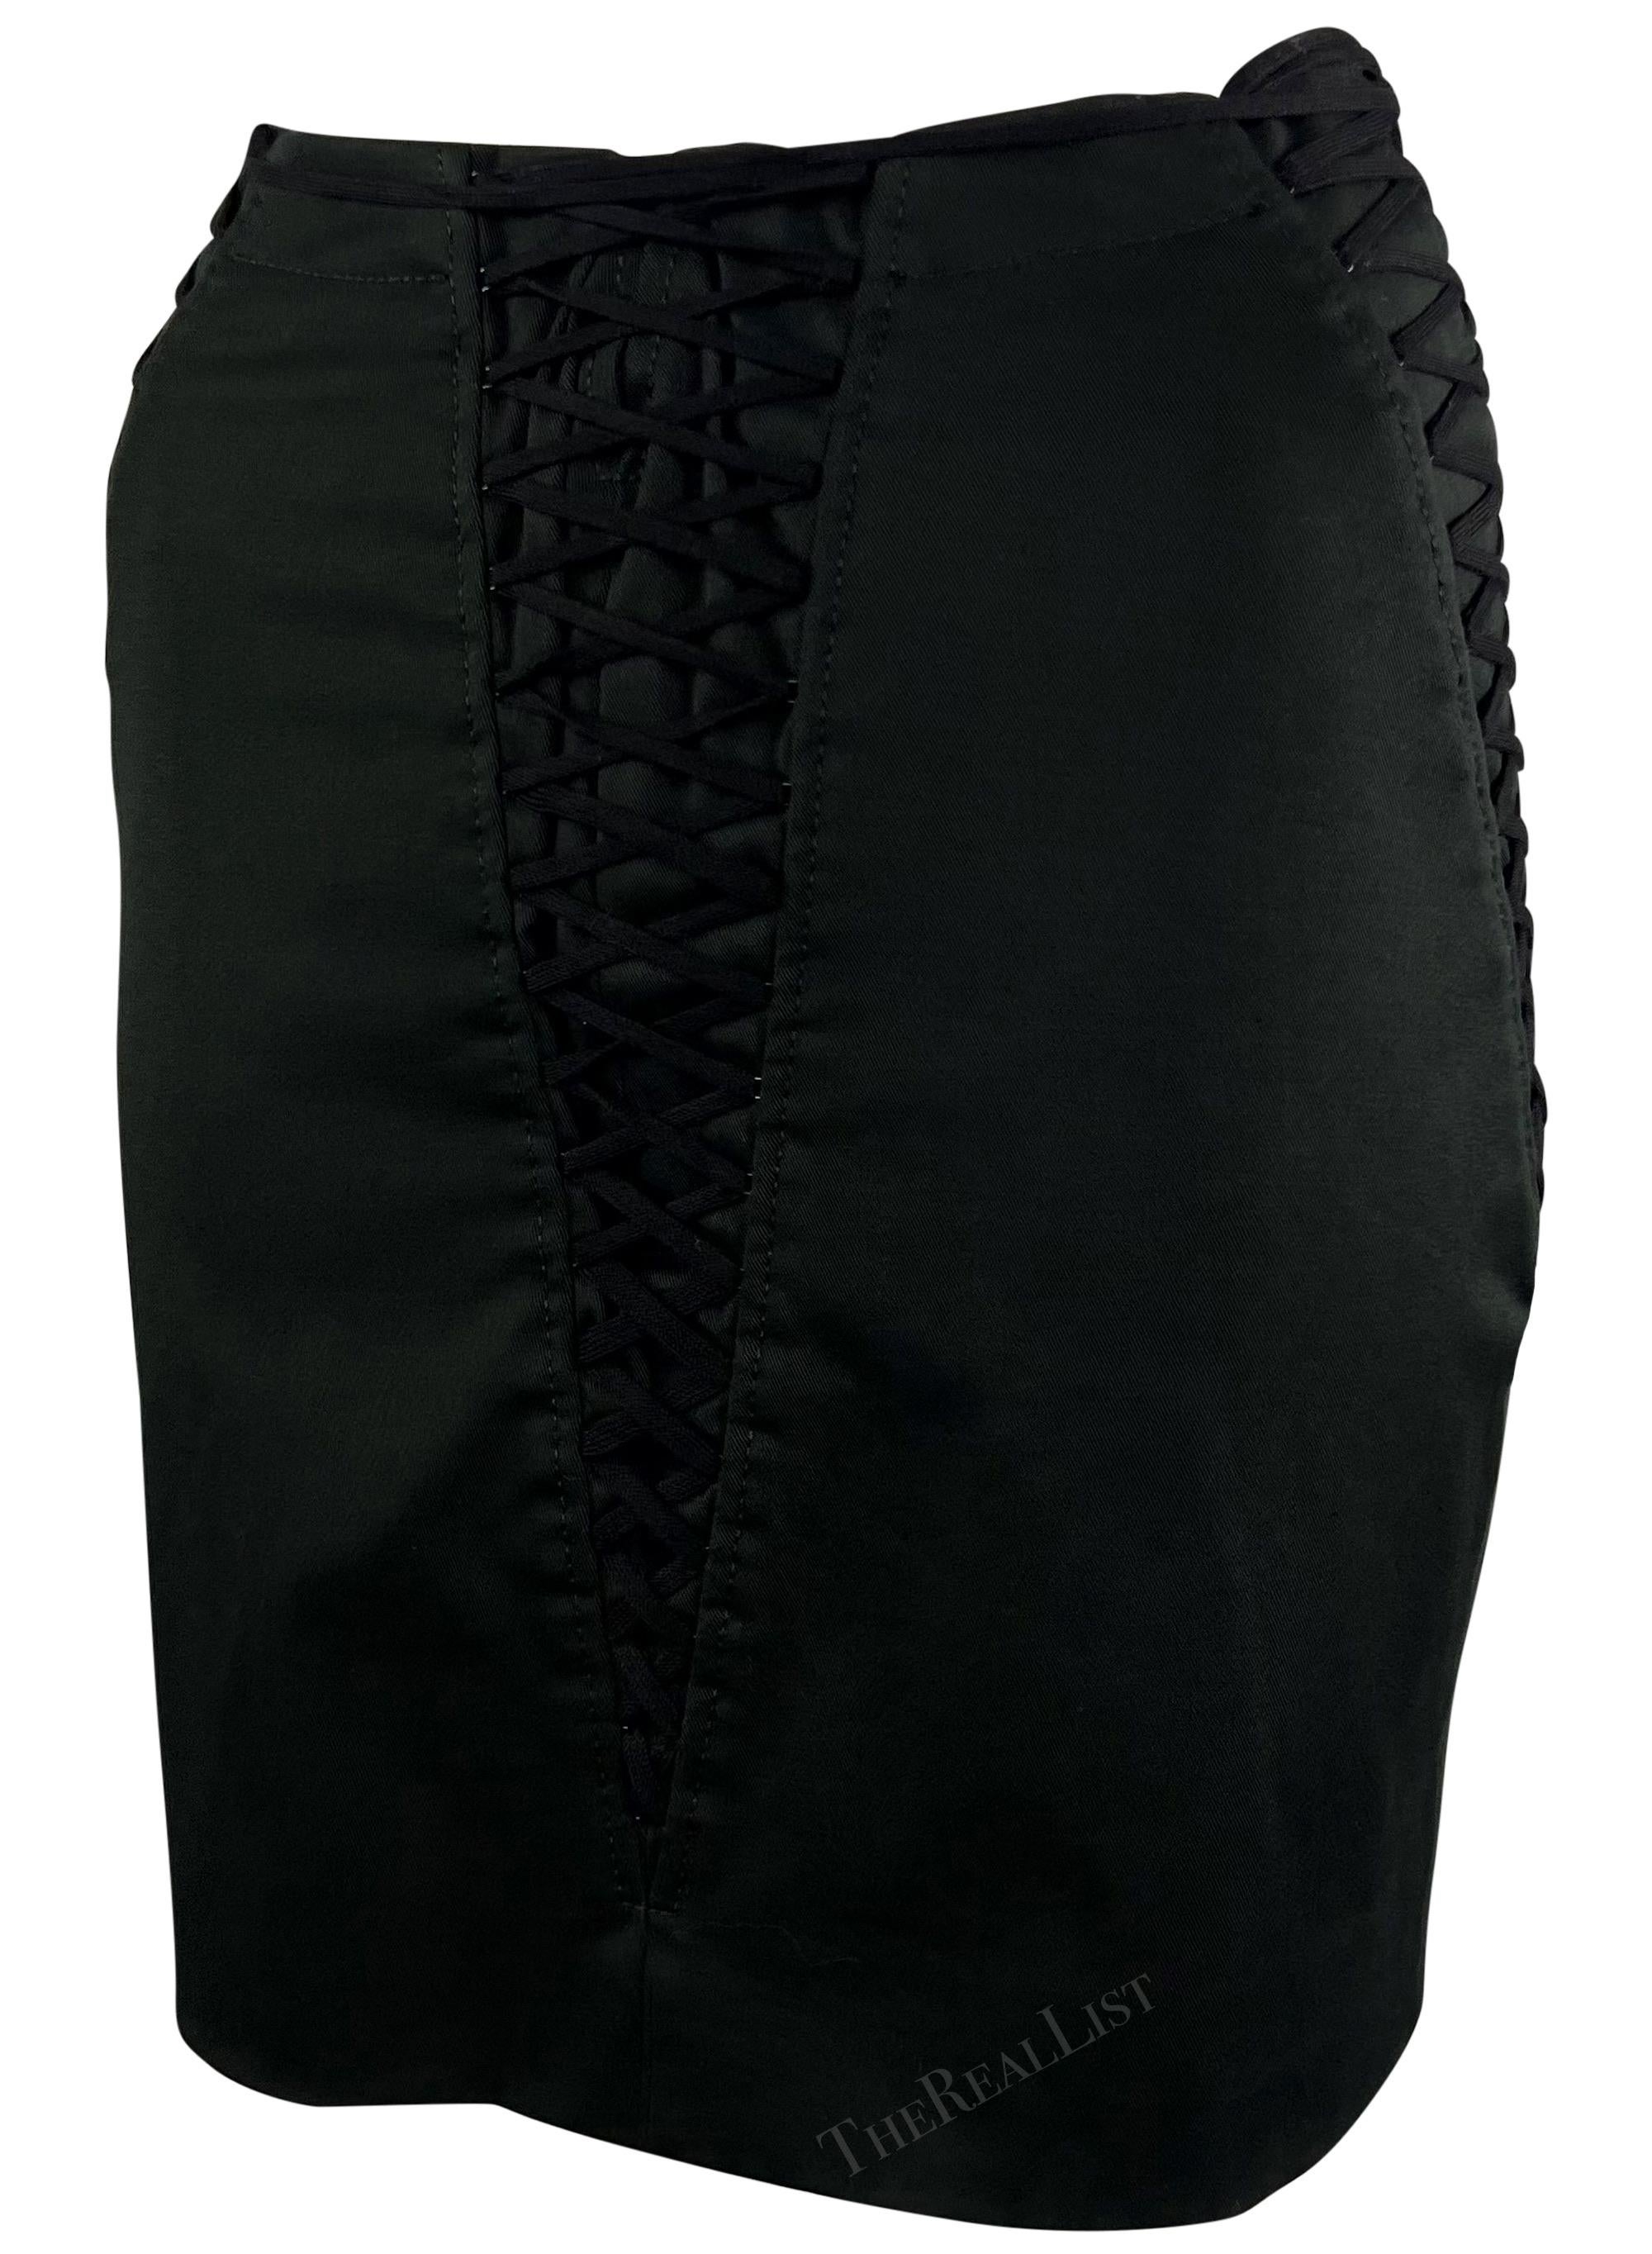 Women's S/S 2002 Dolce & Gabbana Black Lace Up Corset-Style Mini Skirt For Sale